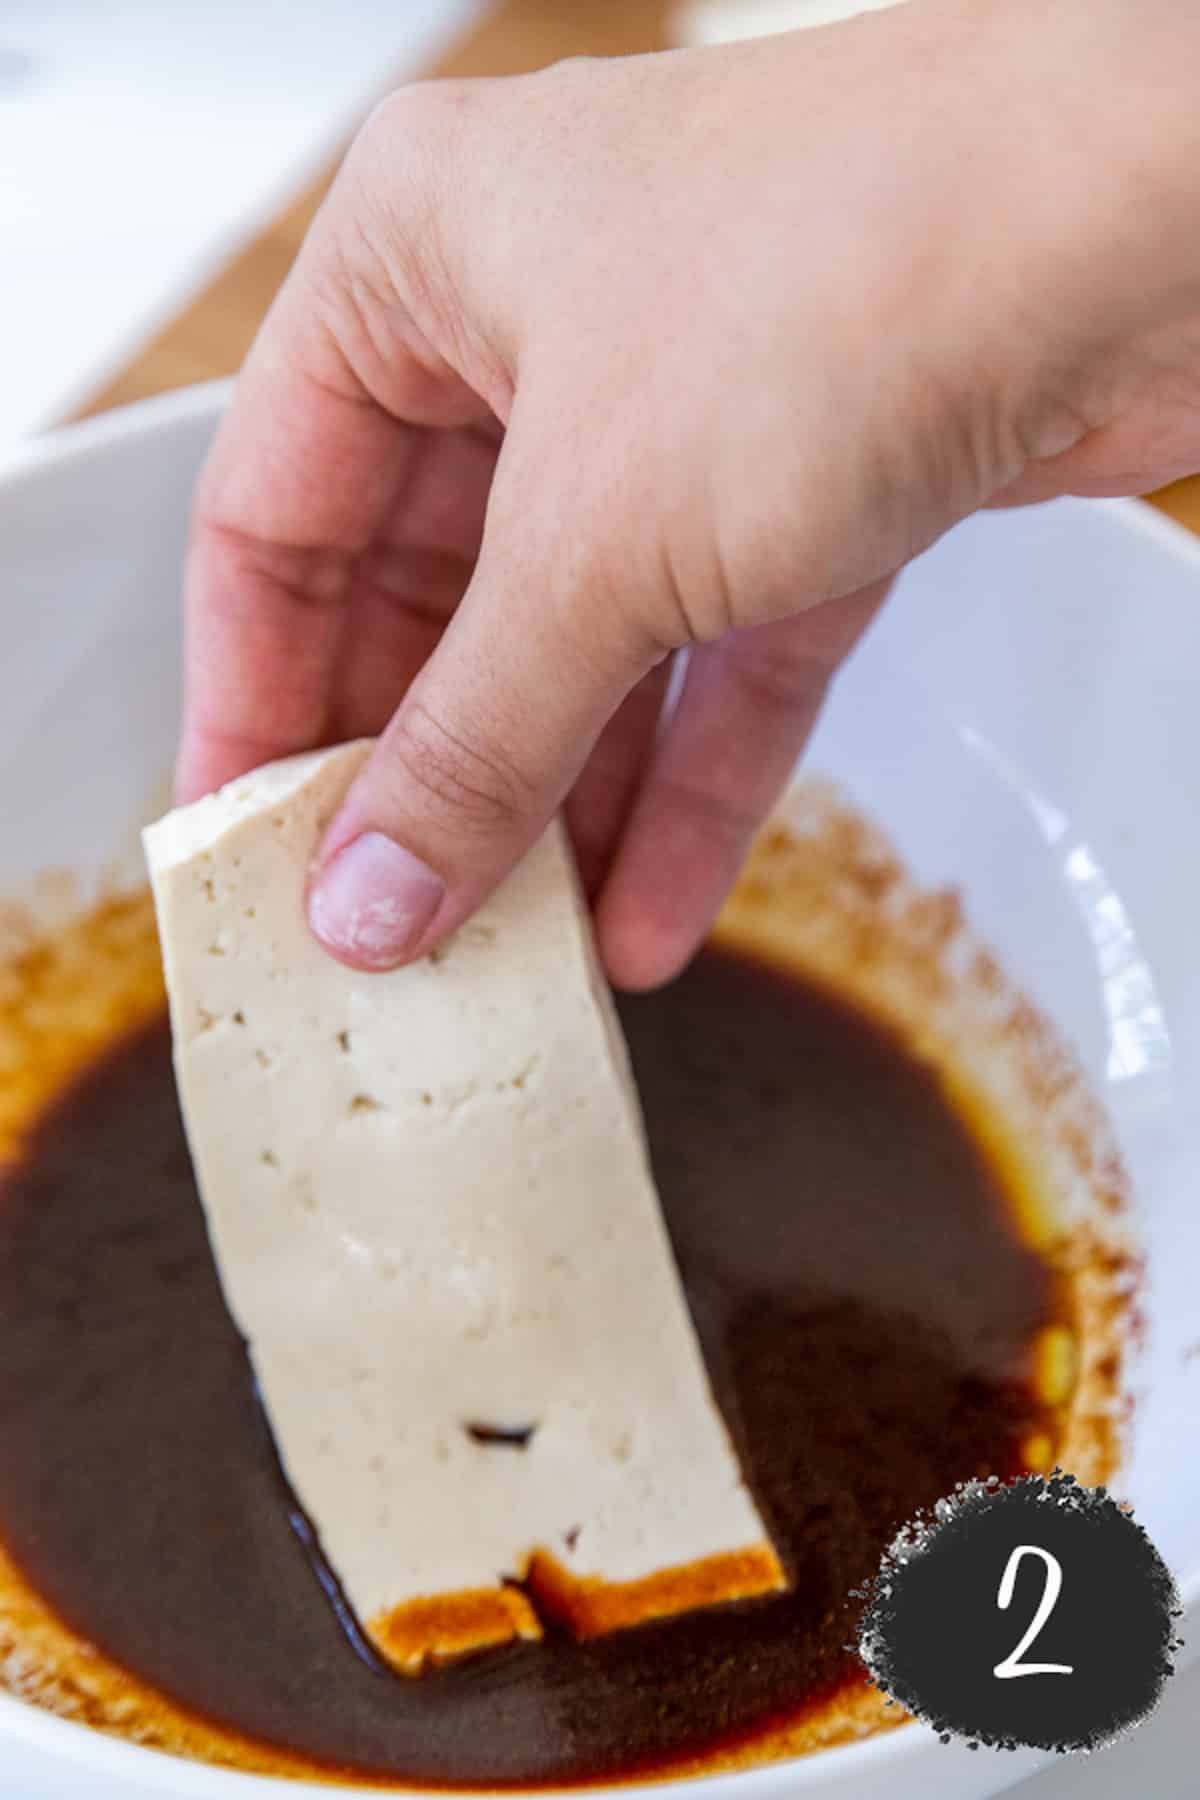 A hand dipping a slice of tofu into a white bowl filled with brown sauce.